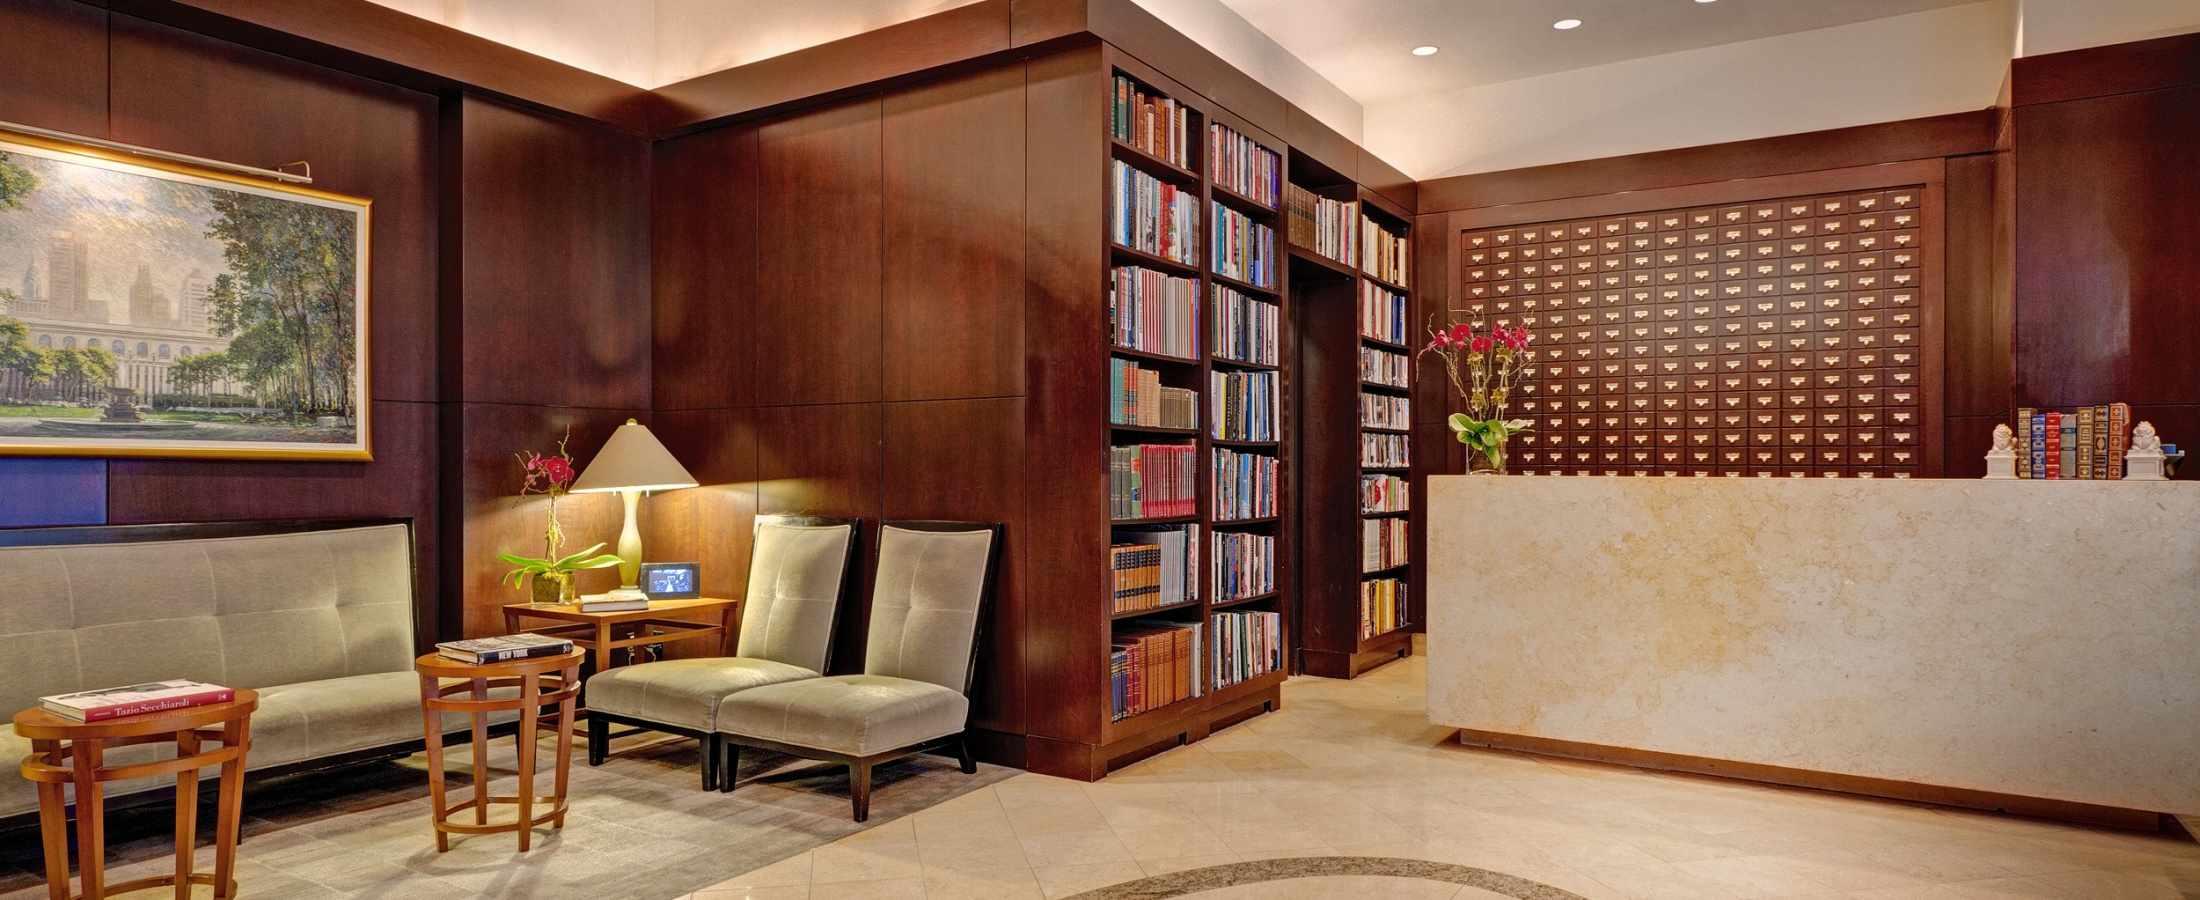 Main Lobby and Front Desk Area at Library Hotel decorated with colorful bookshelves.